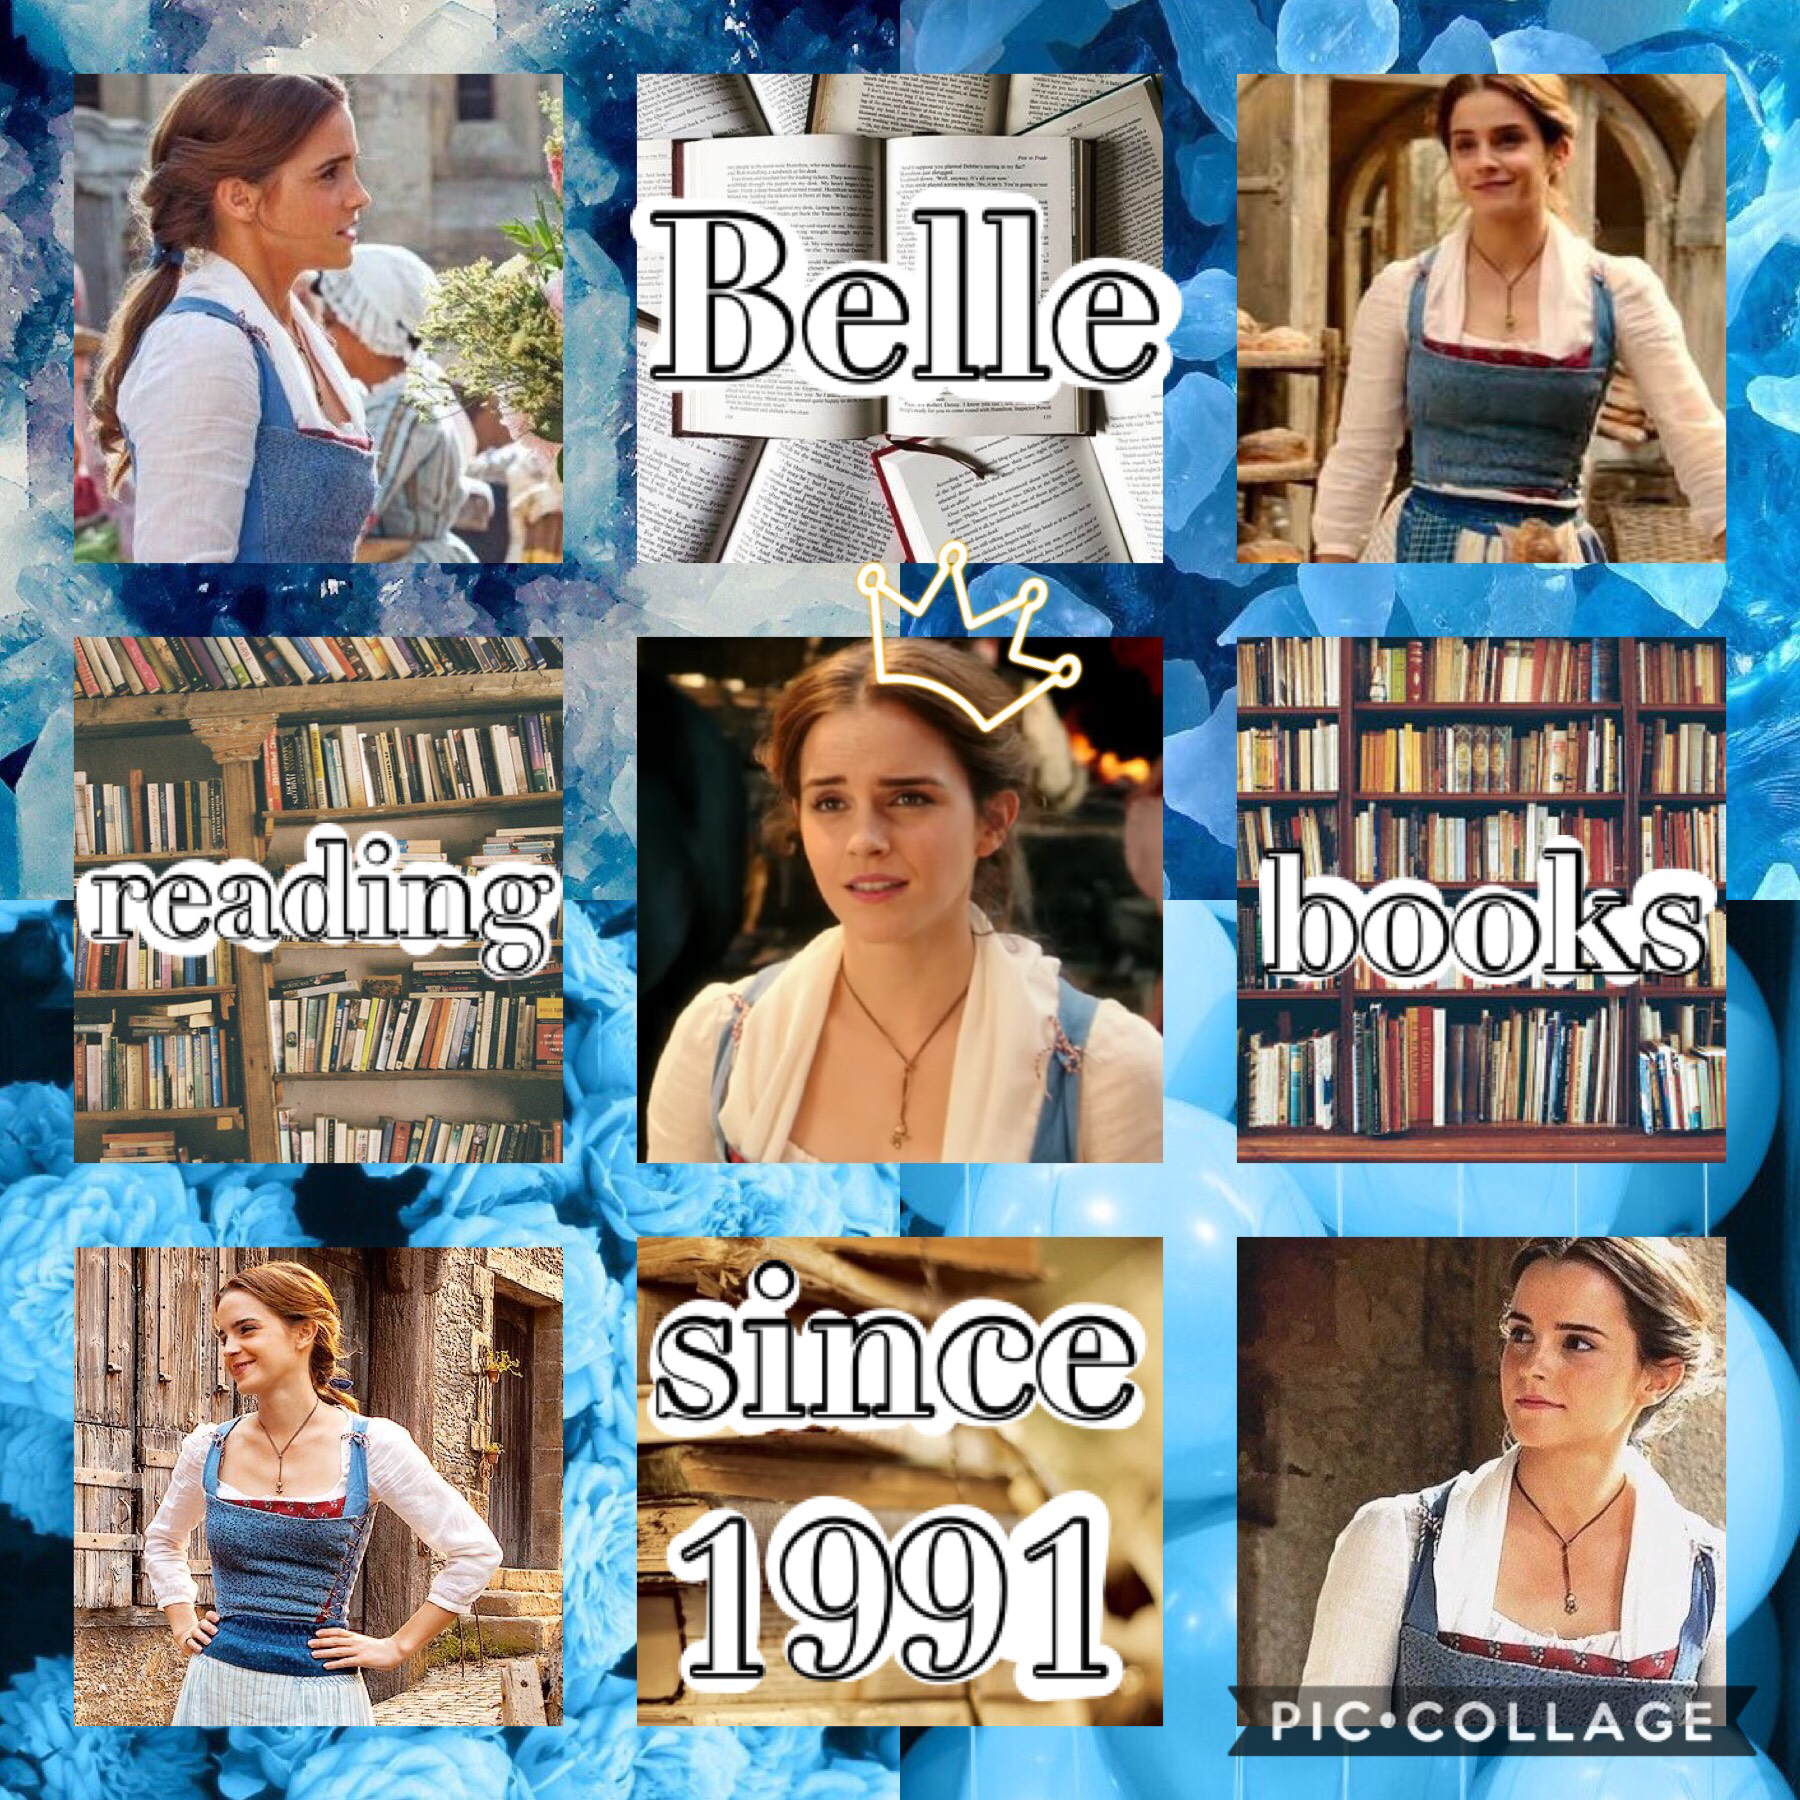 TYSM BookwormlyMe FOR THE ICON!!! Used a friends style for this collage!